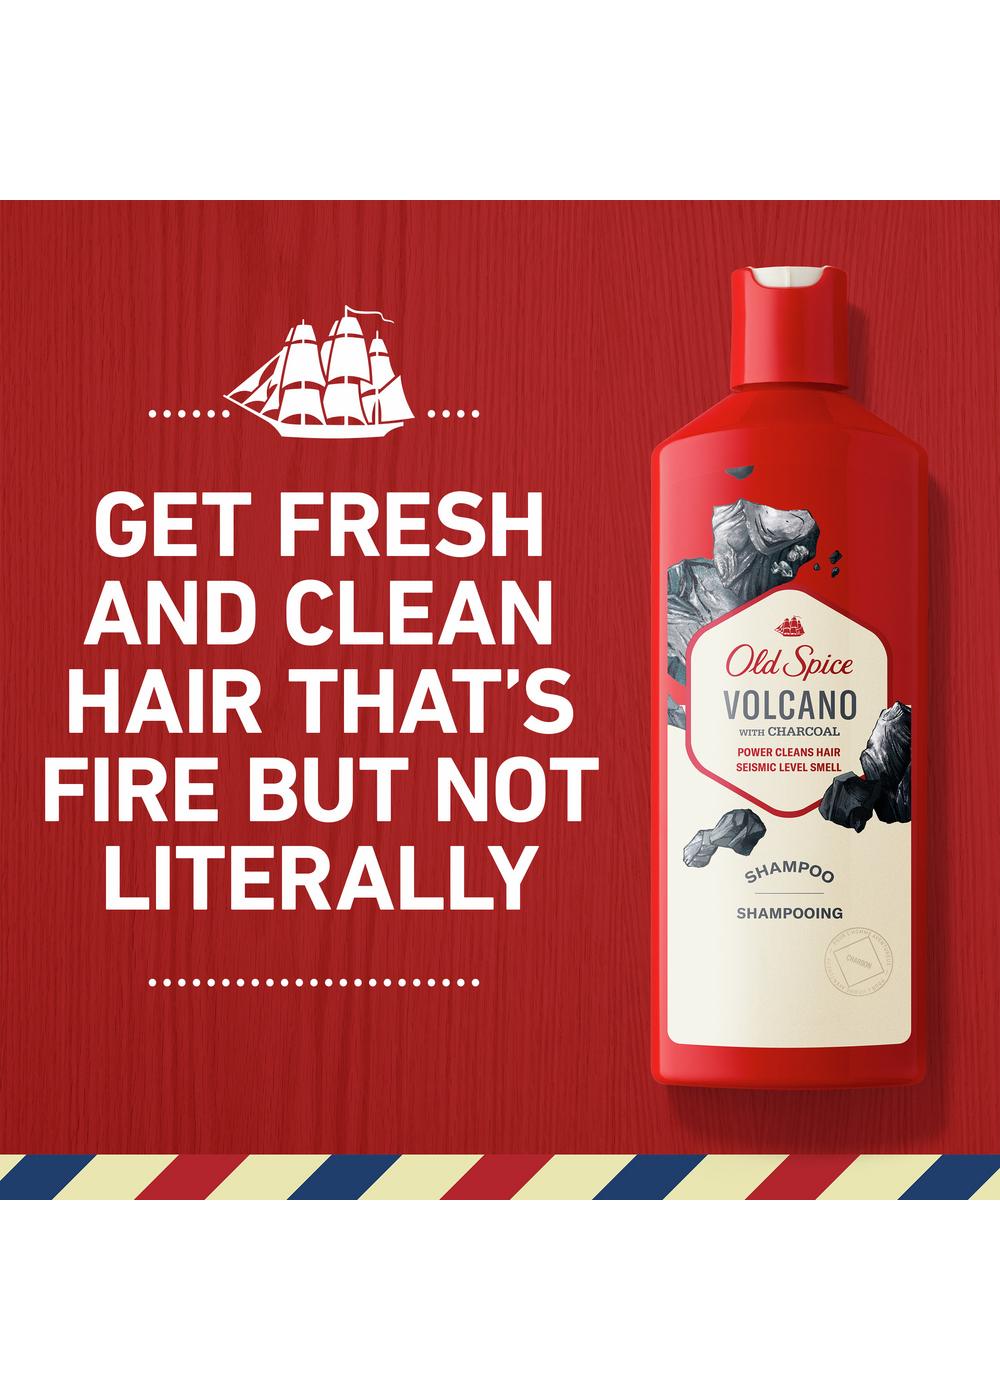 Old Spice Volcano with Charcoal Shampoo; image 3 of 7